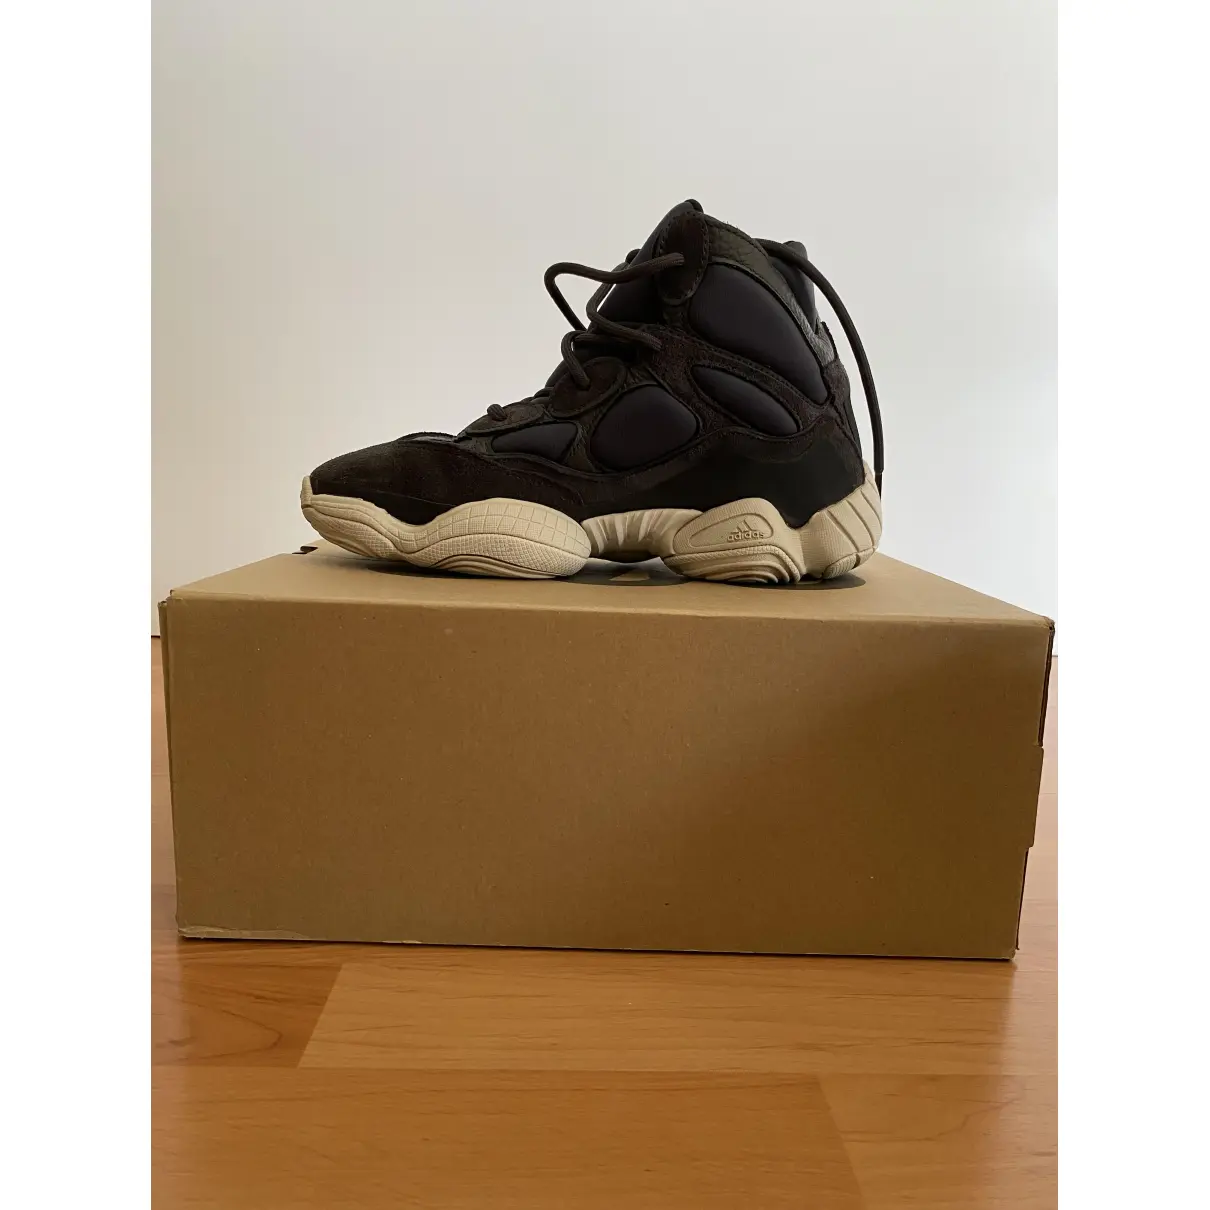 500 leather high trainers Yeezy x Adidas